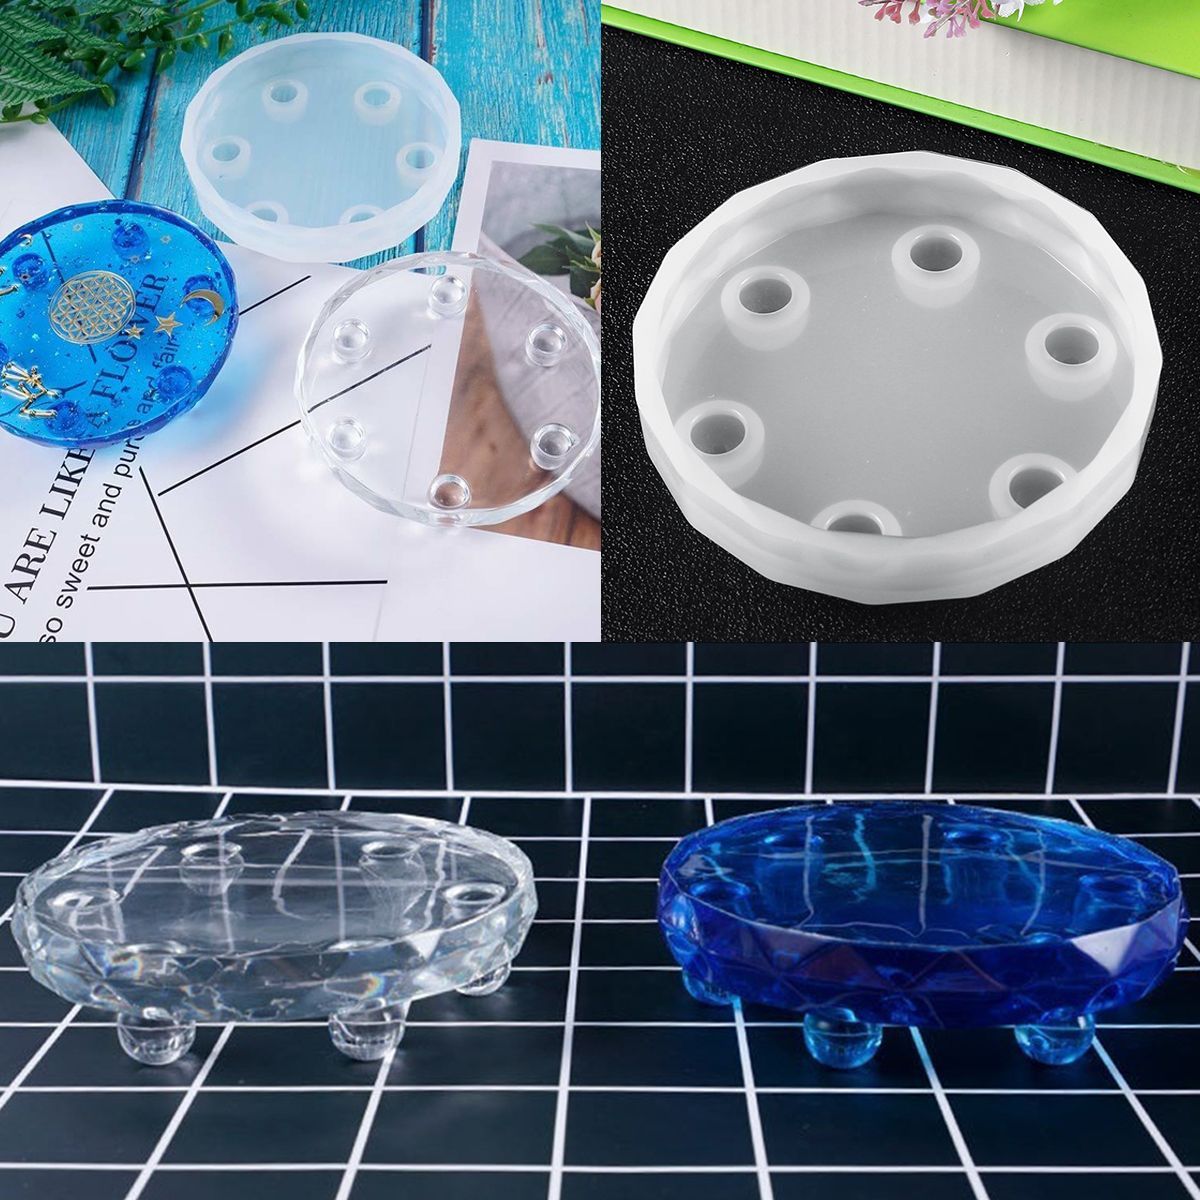 Handmade-DIY-Resin-Casting-Molds-Silicone-Table-Mold-Craft-Making-Mould-Tool-Kit-1685779